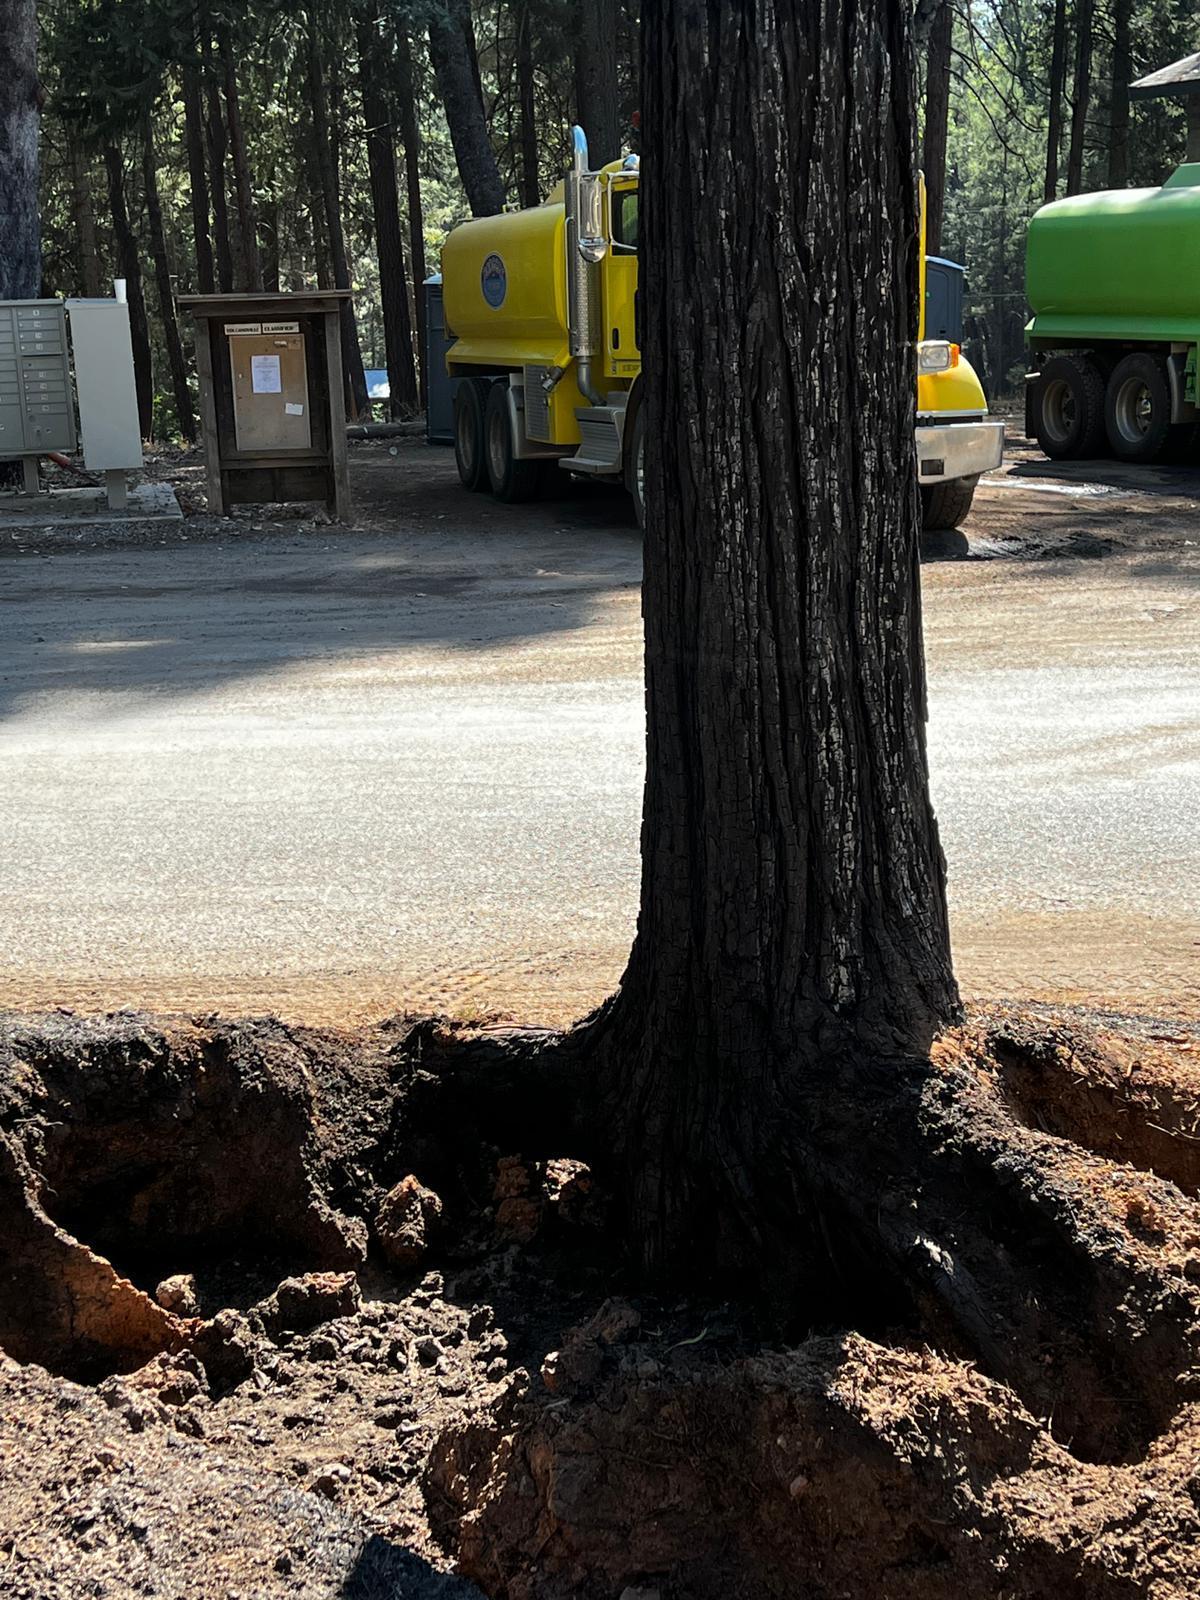 A burned tree with a large hole at the roots in an evacuated community. An example of hazards that remain and need to be addressed before public can return to the area